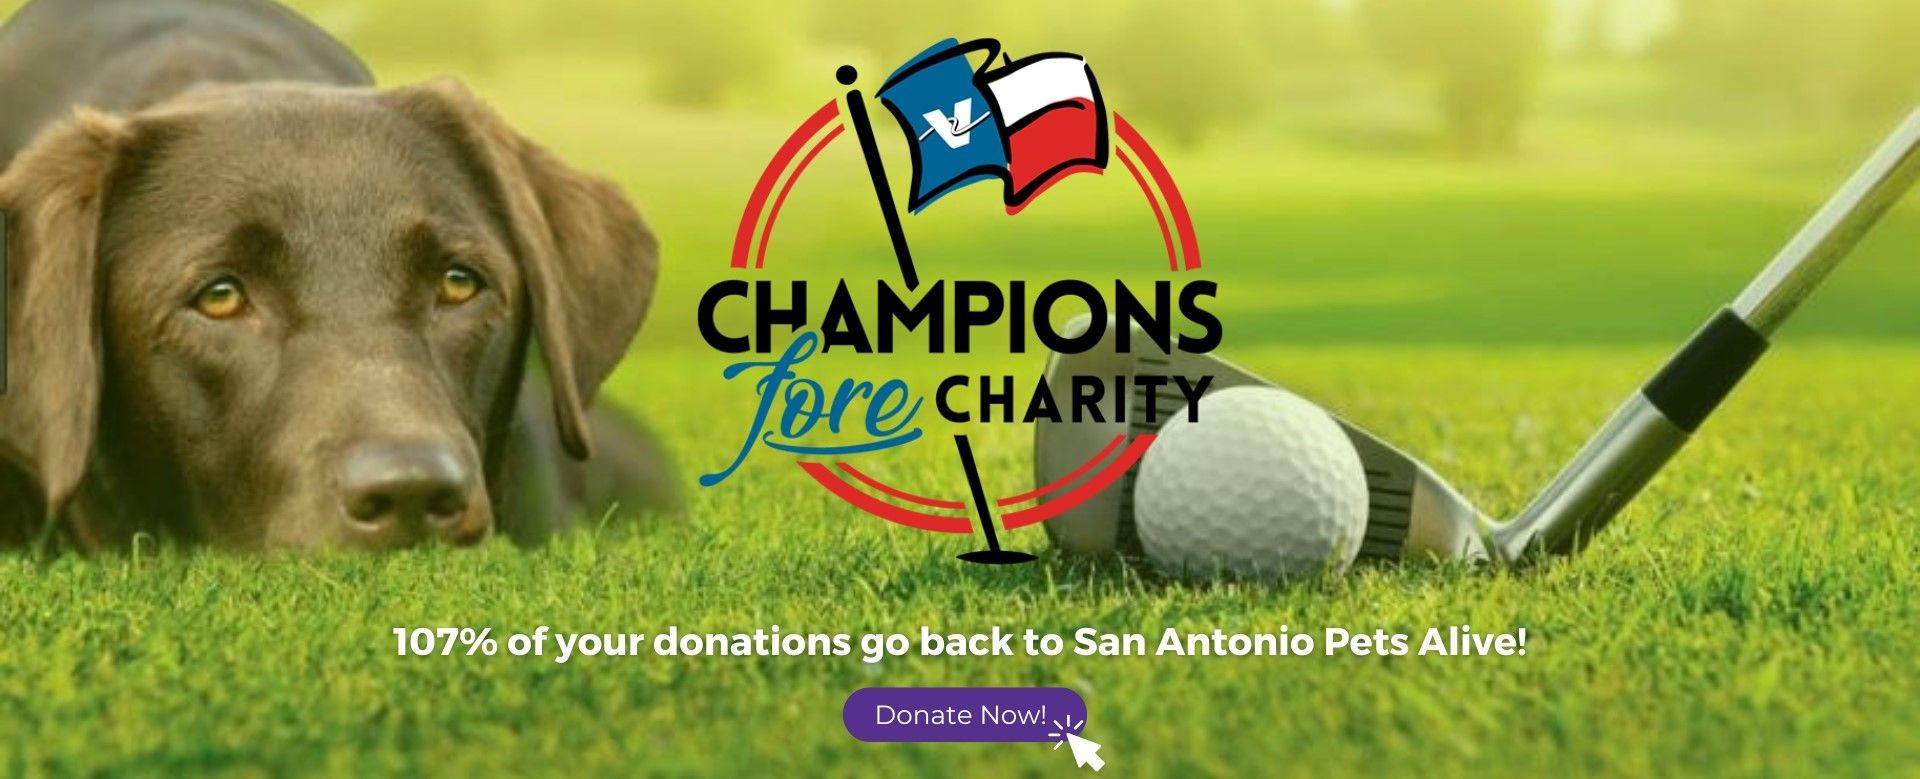 Champions Fore Charity - 107% of your donations go back to San Antonio Pets Alive! - Donate Now!